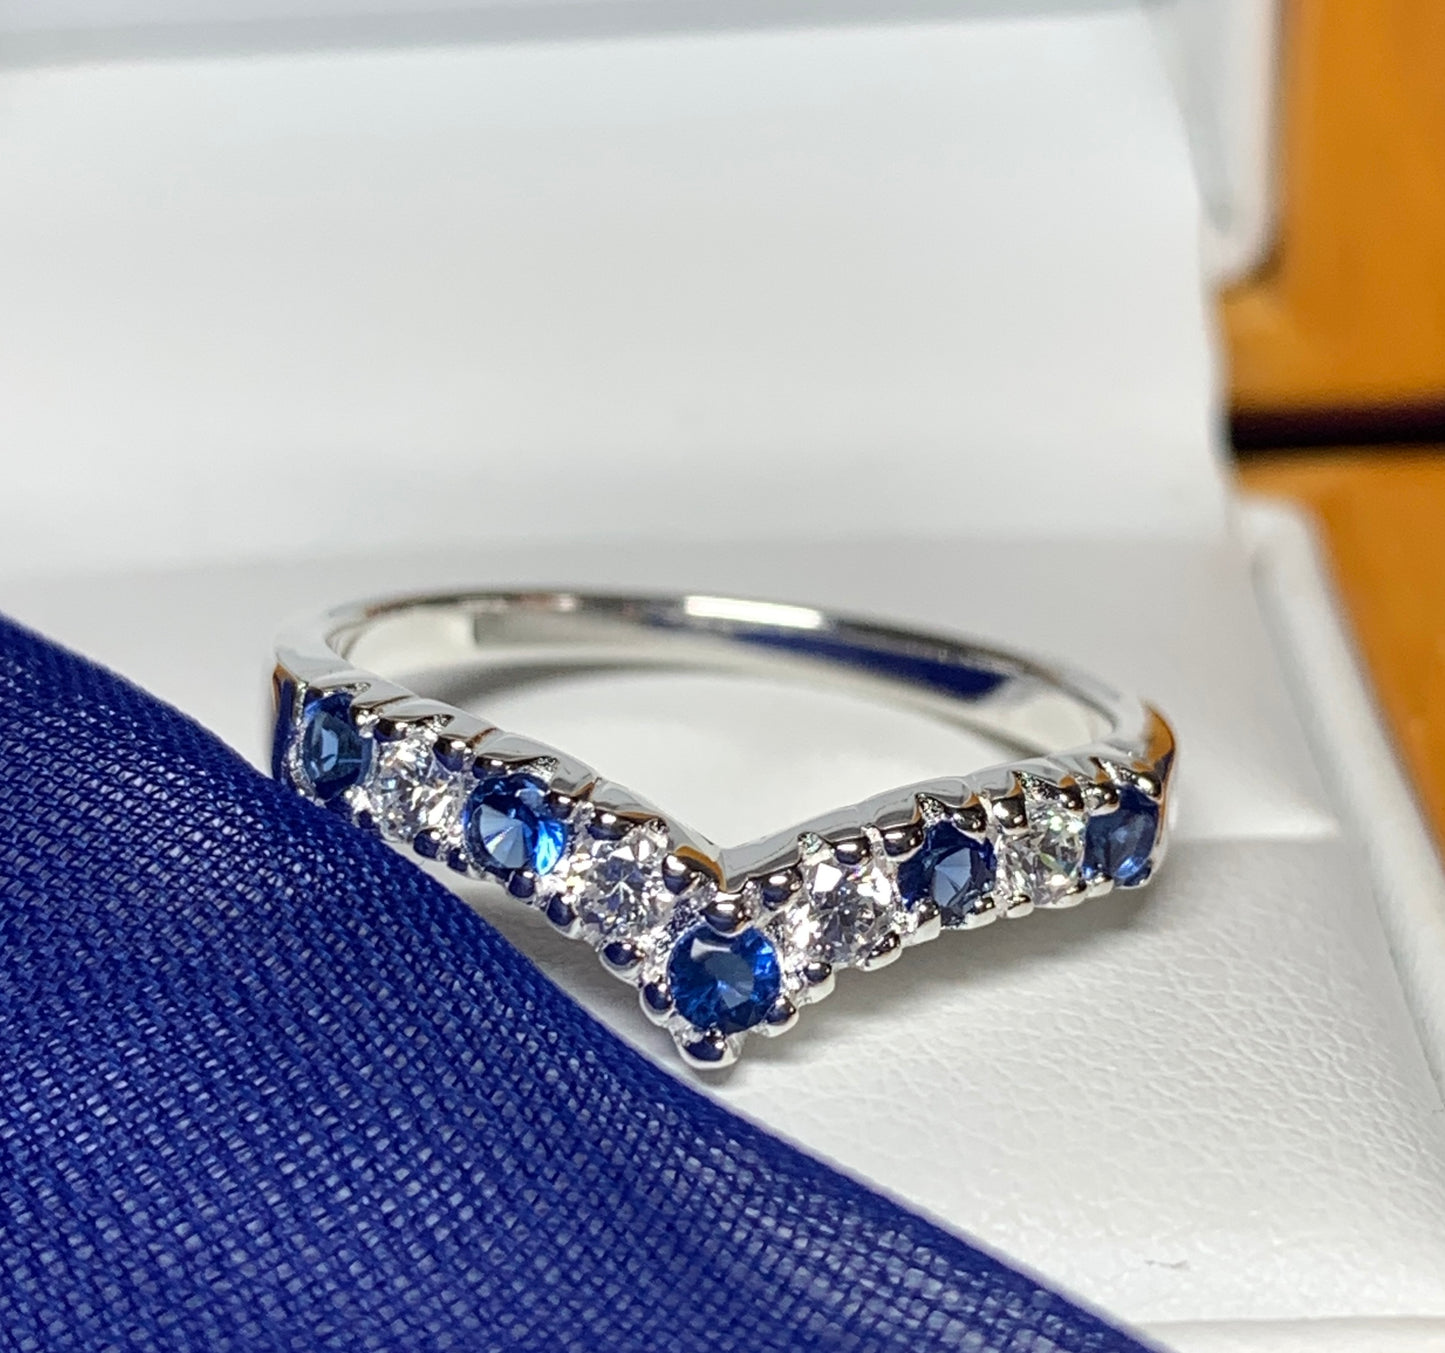 Sterling Silver Blue Sapphire And Cubic Zirconia Wishbone Ring